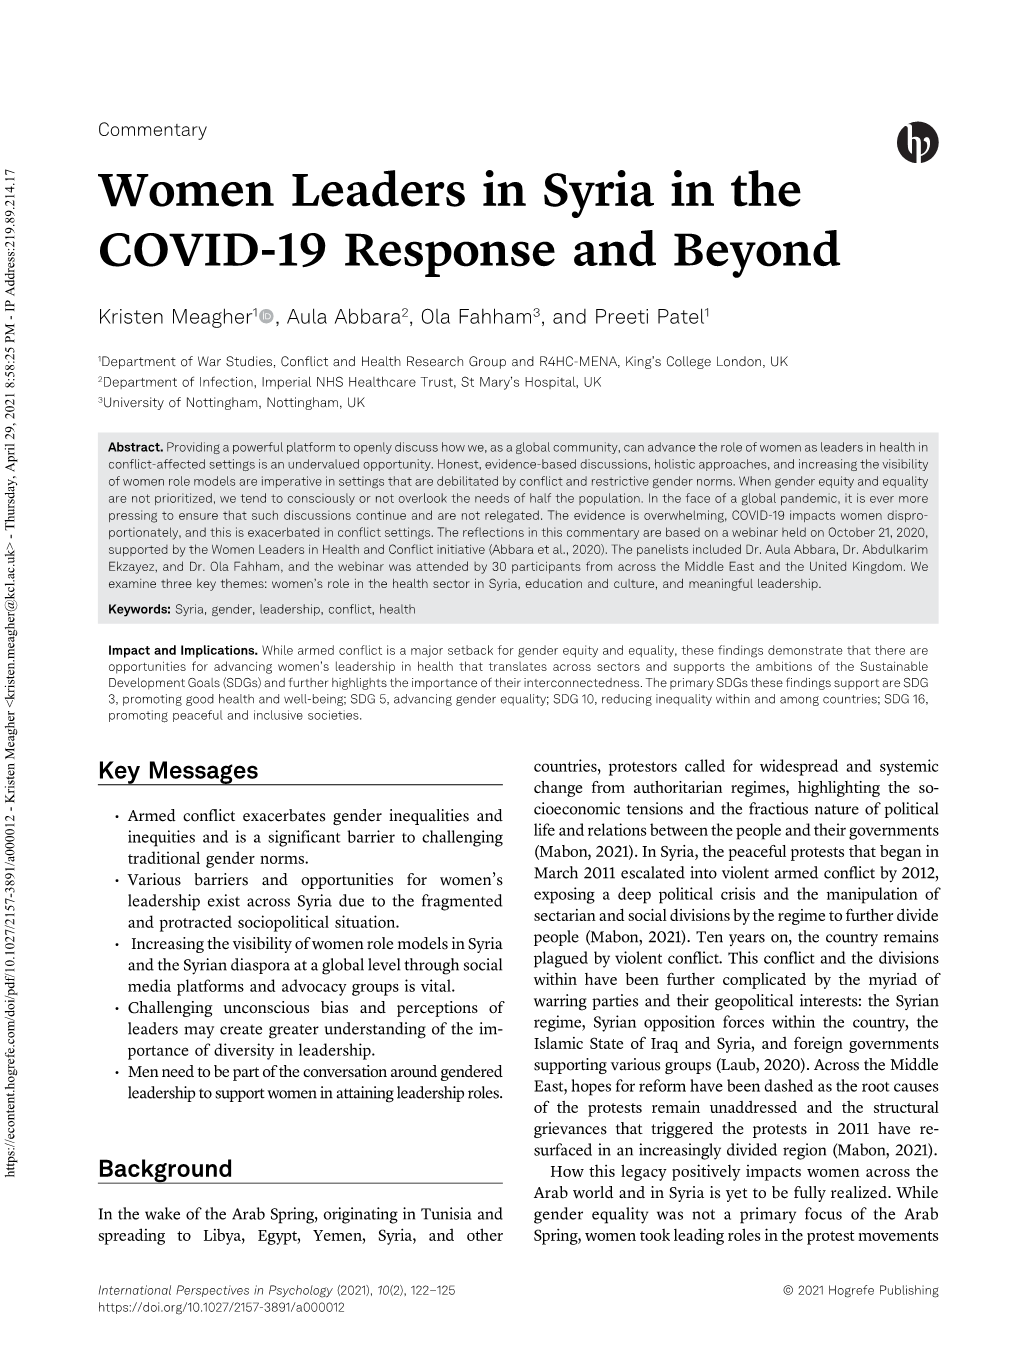 Women Leaders in Syria in the COVID-19 Response and Beyond